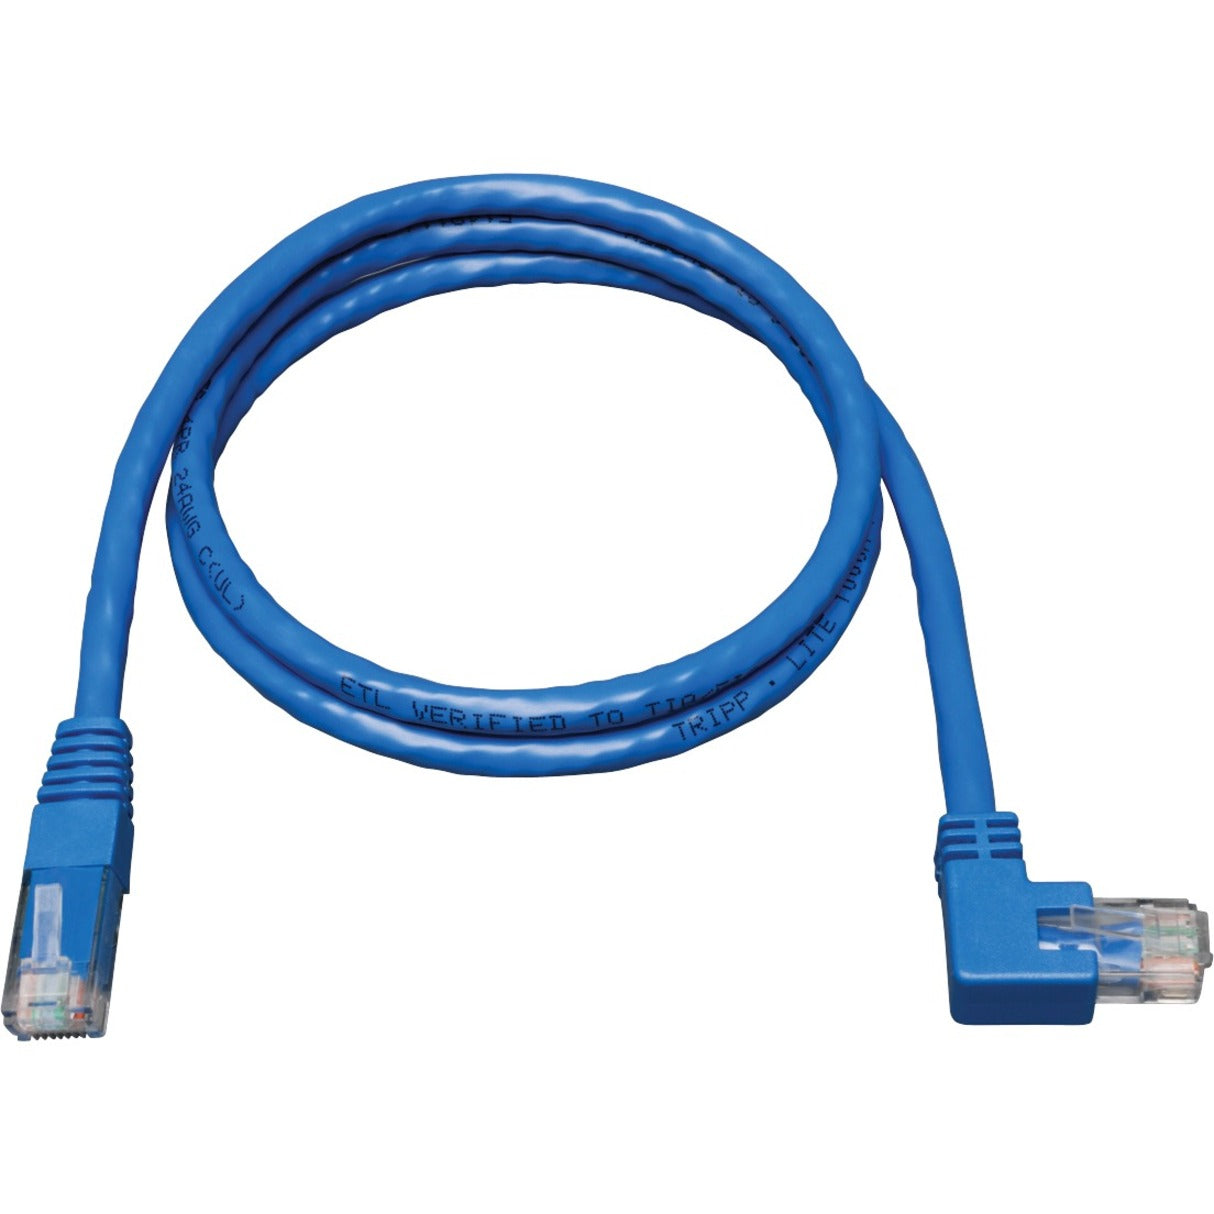 Tripp Lite N204-003-BL-RA Cat6 Patch Cable, 3 ft, Right-angled Connector, Blue